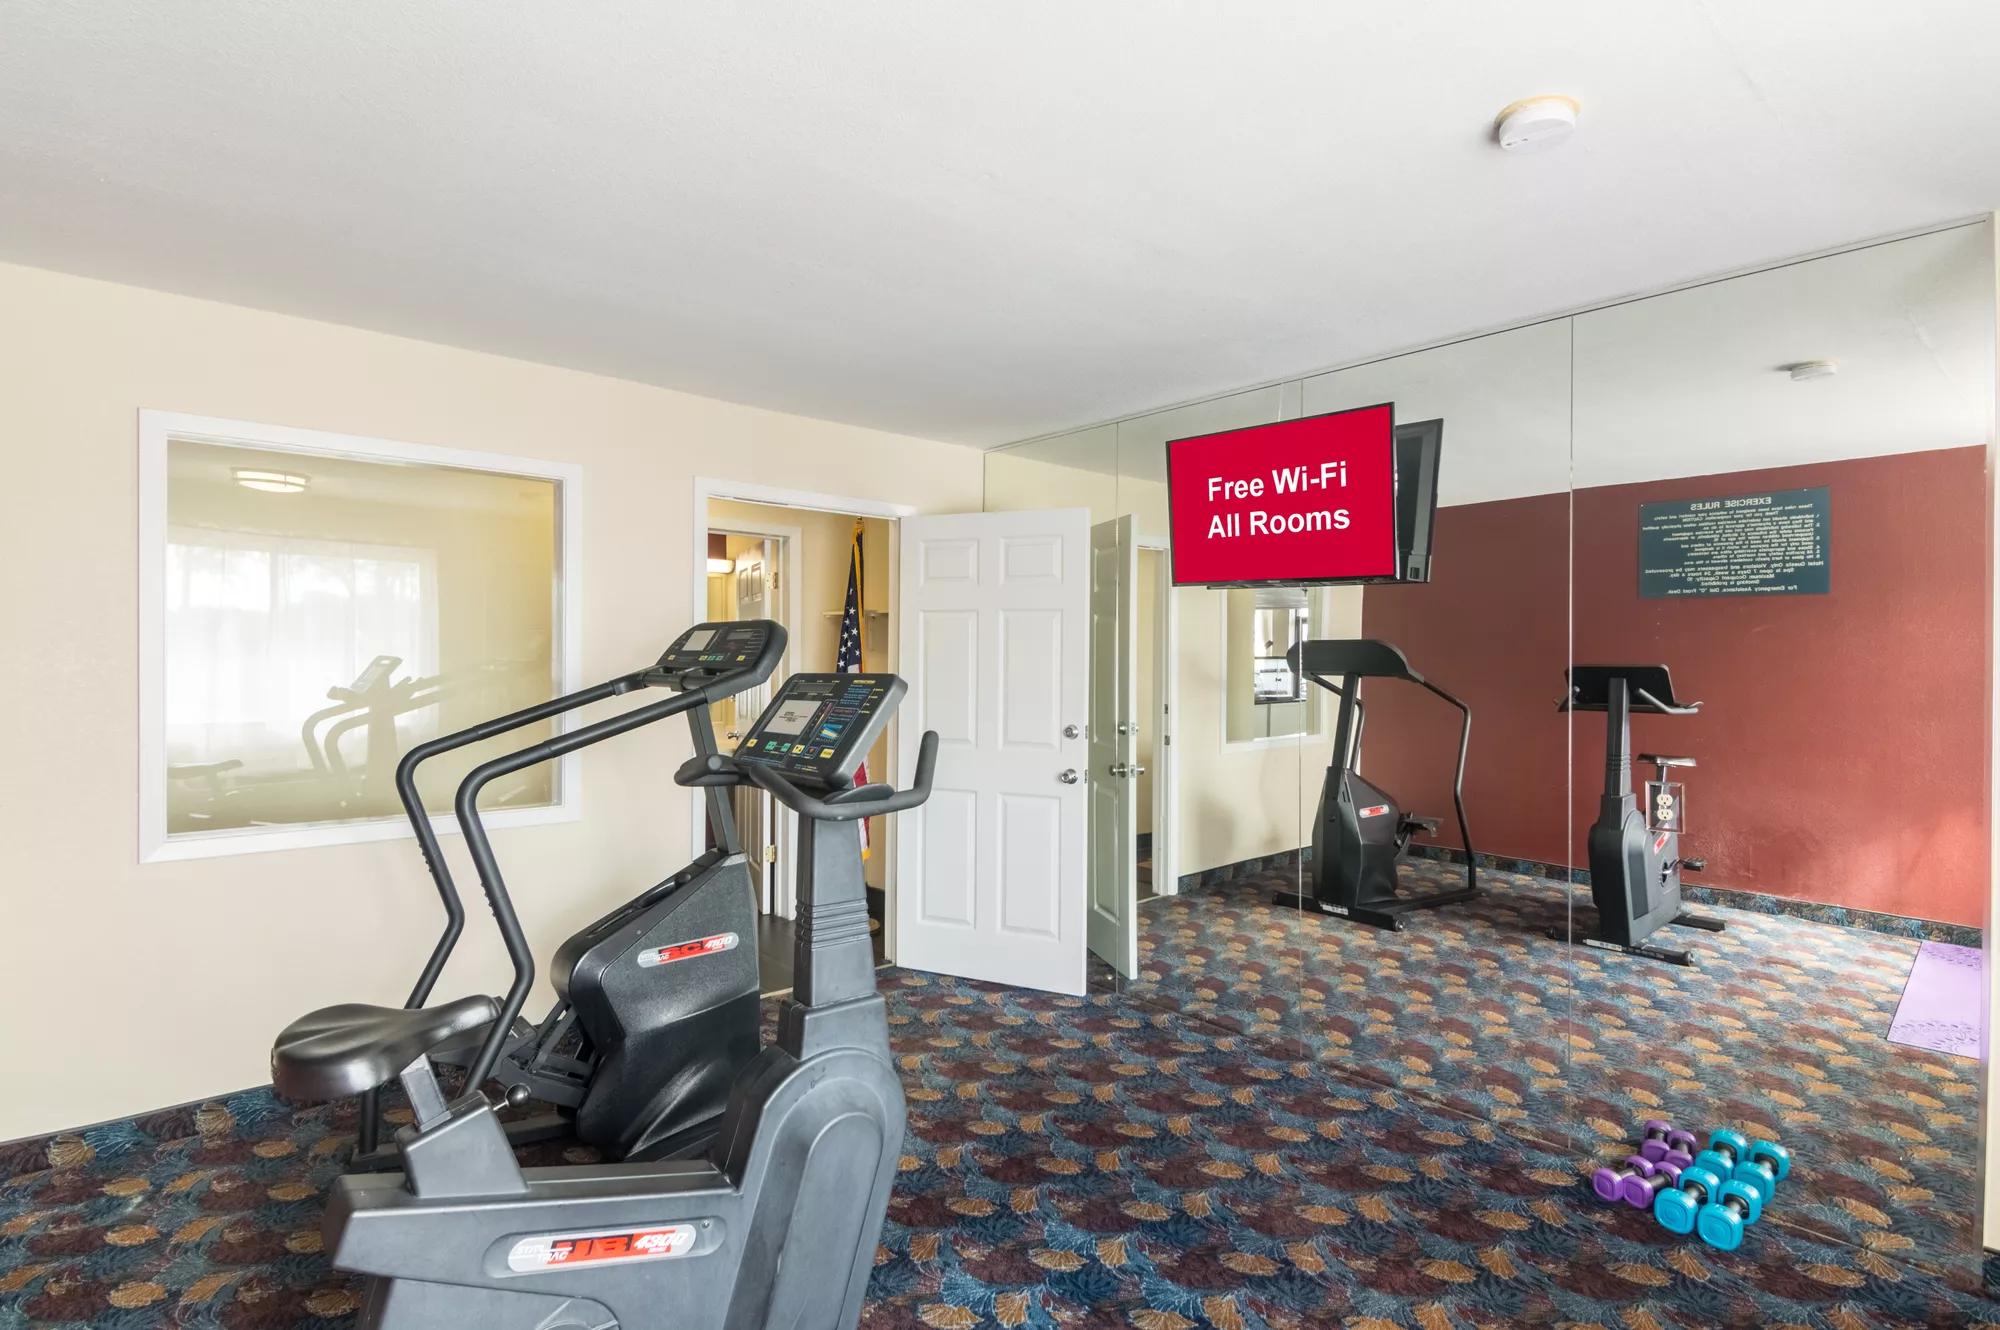 Red Roof Inn Wichita Falls Onsite Fitness Facility Image 